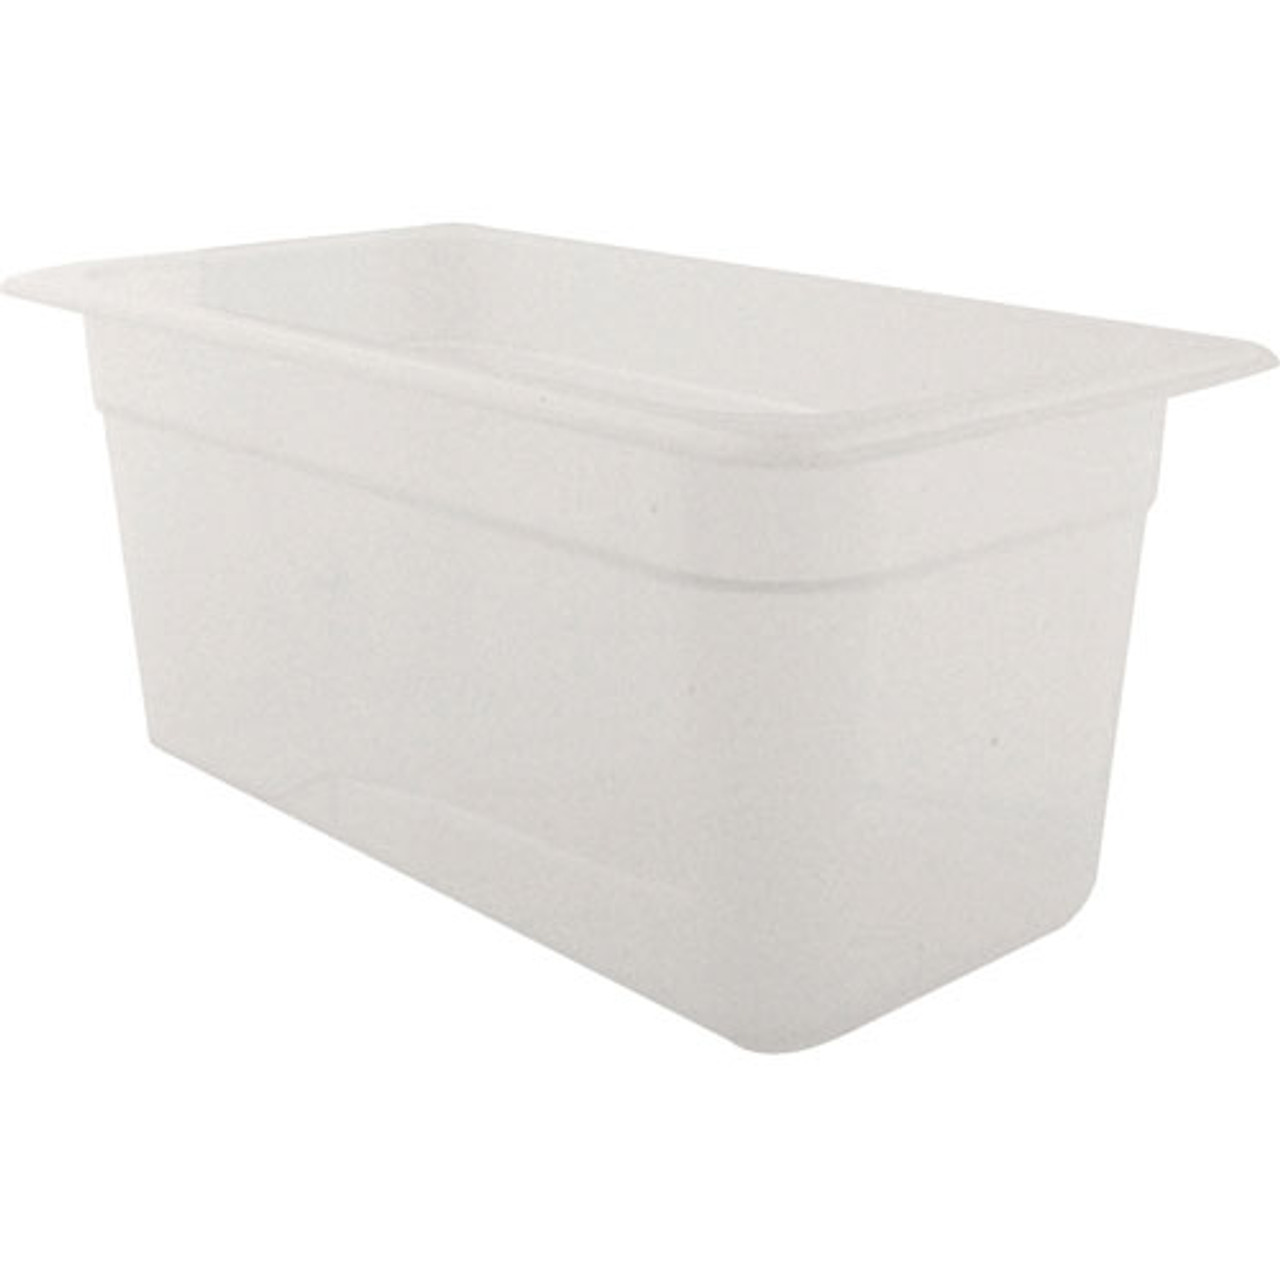 Pan 1/3 X 6 Plastic Semi-Clear - Replacement Part For Cambro 36PP190